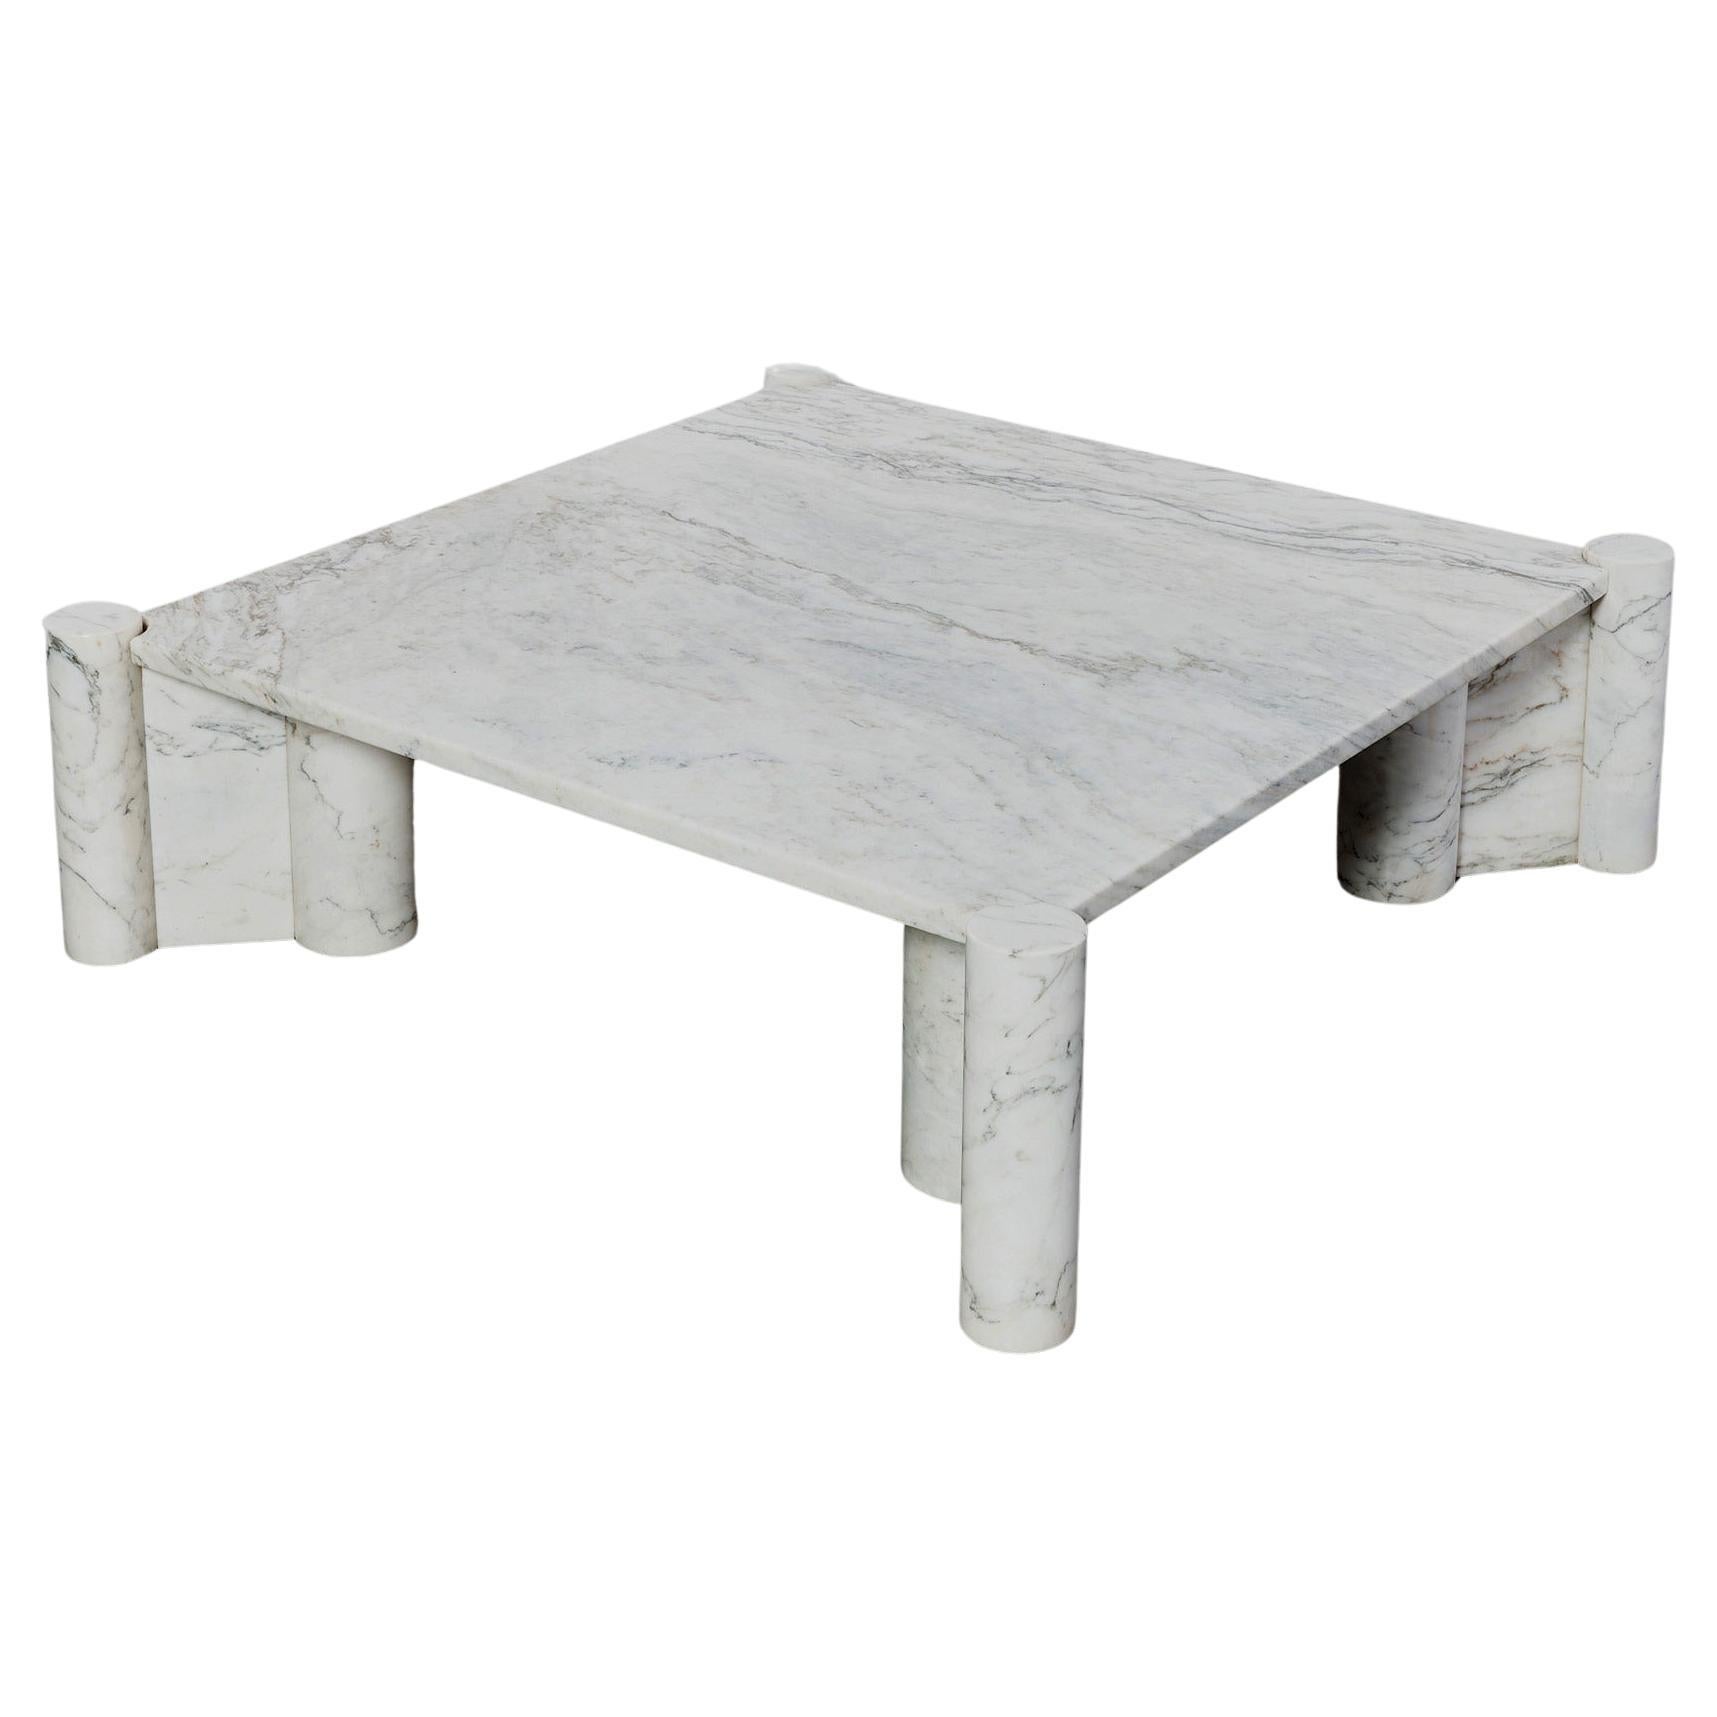 Jumbo marble coffee table by Gae Aulenti for Knoll International